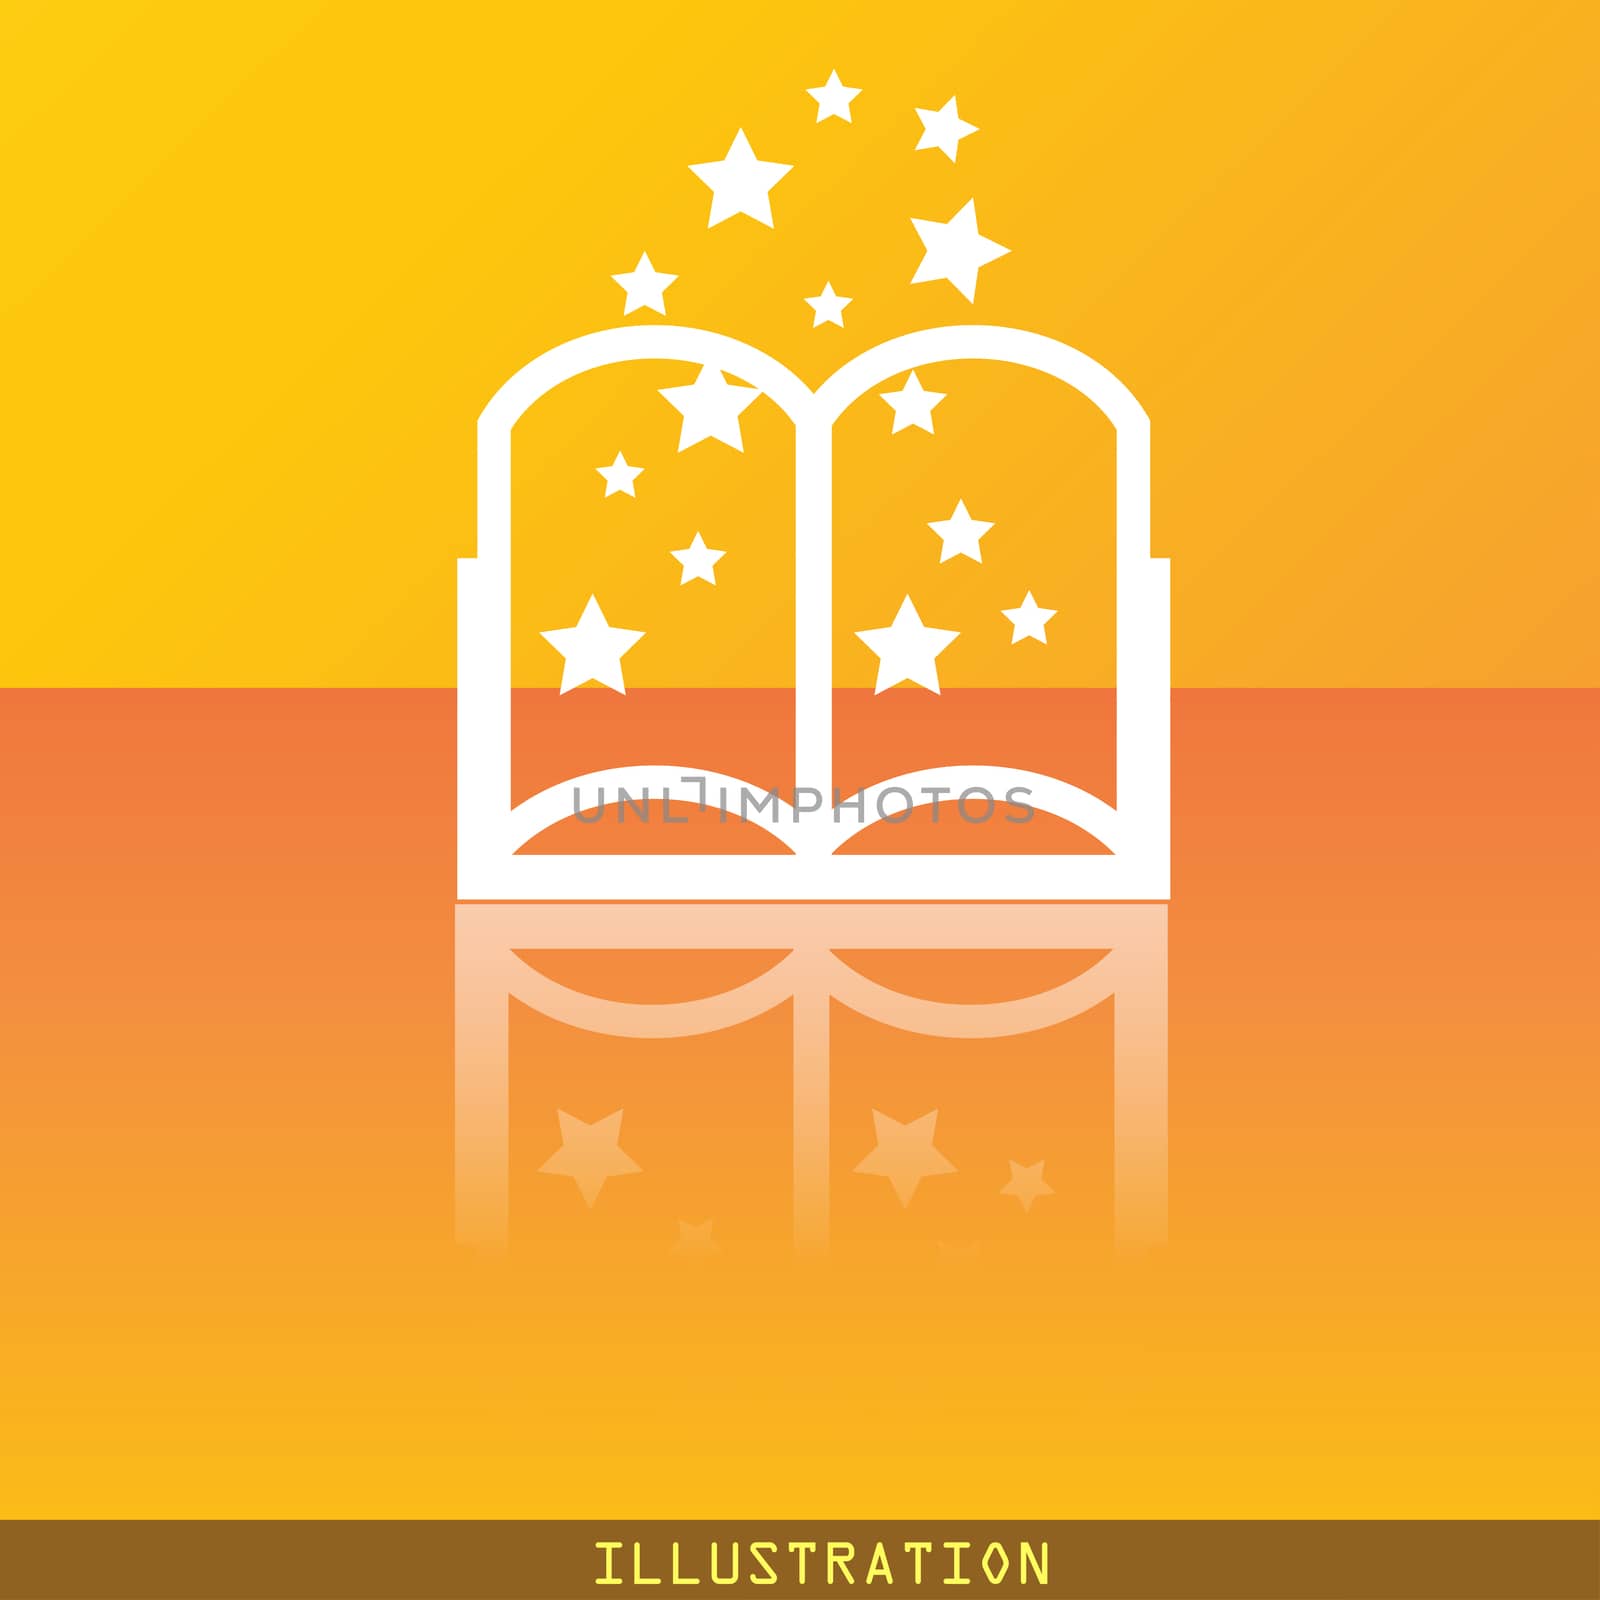 Magic Book icon symbol Flat modern web design with reflection and space for your text. illustration. Raster version